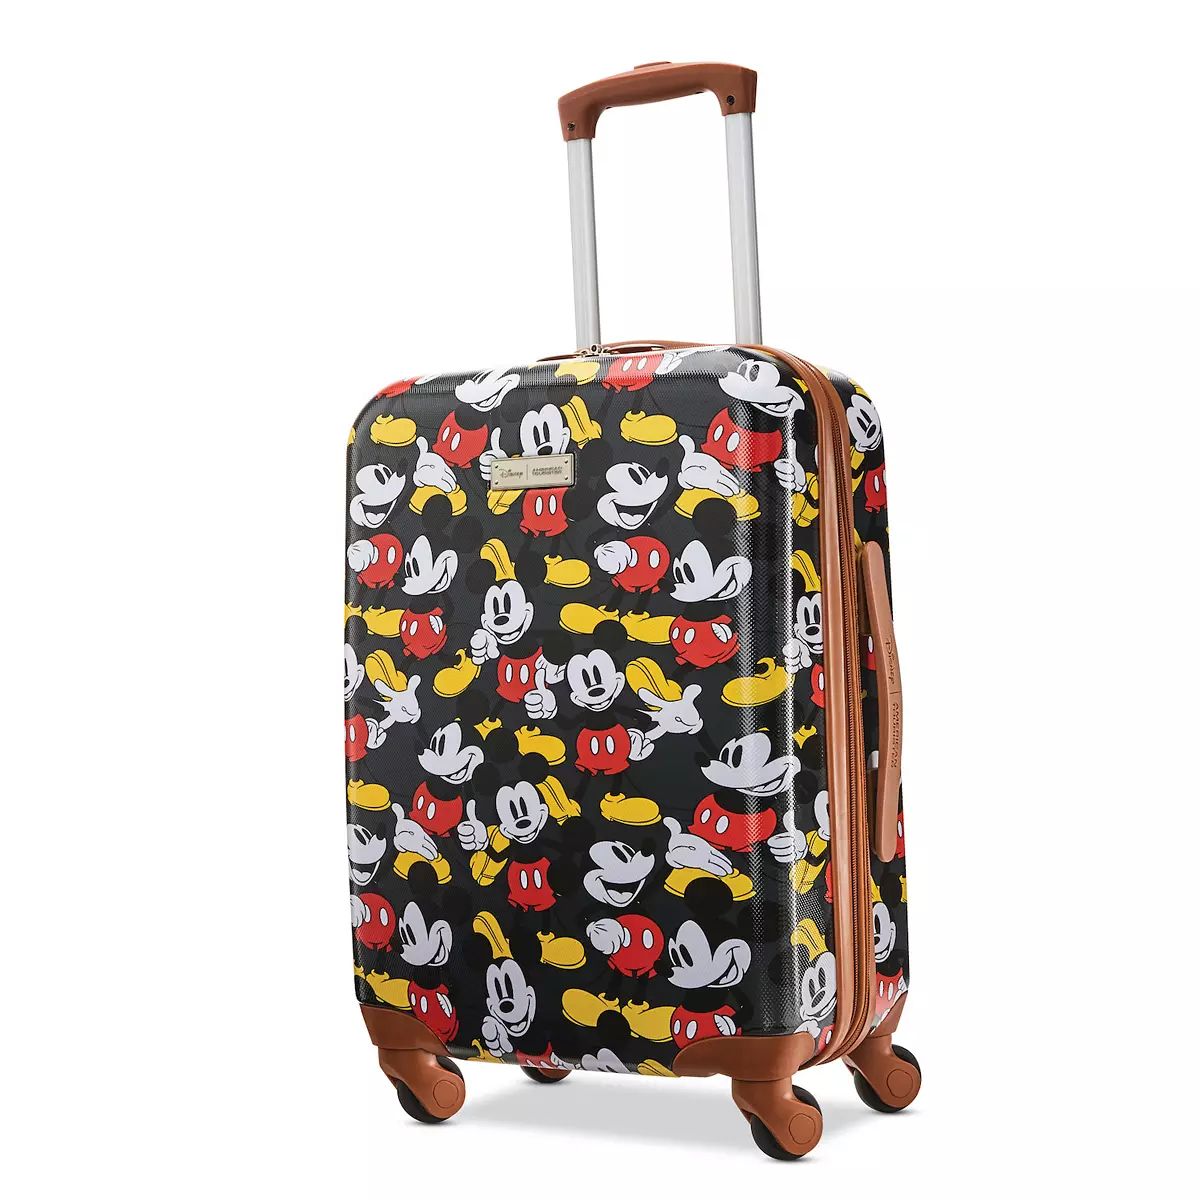 American Tourister Disney's Mickey Mouse Hardside Spinner Luggage | Kohl's